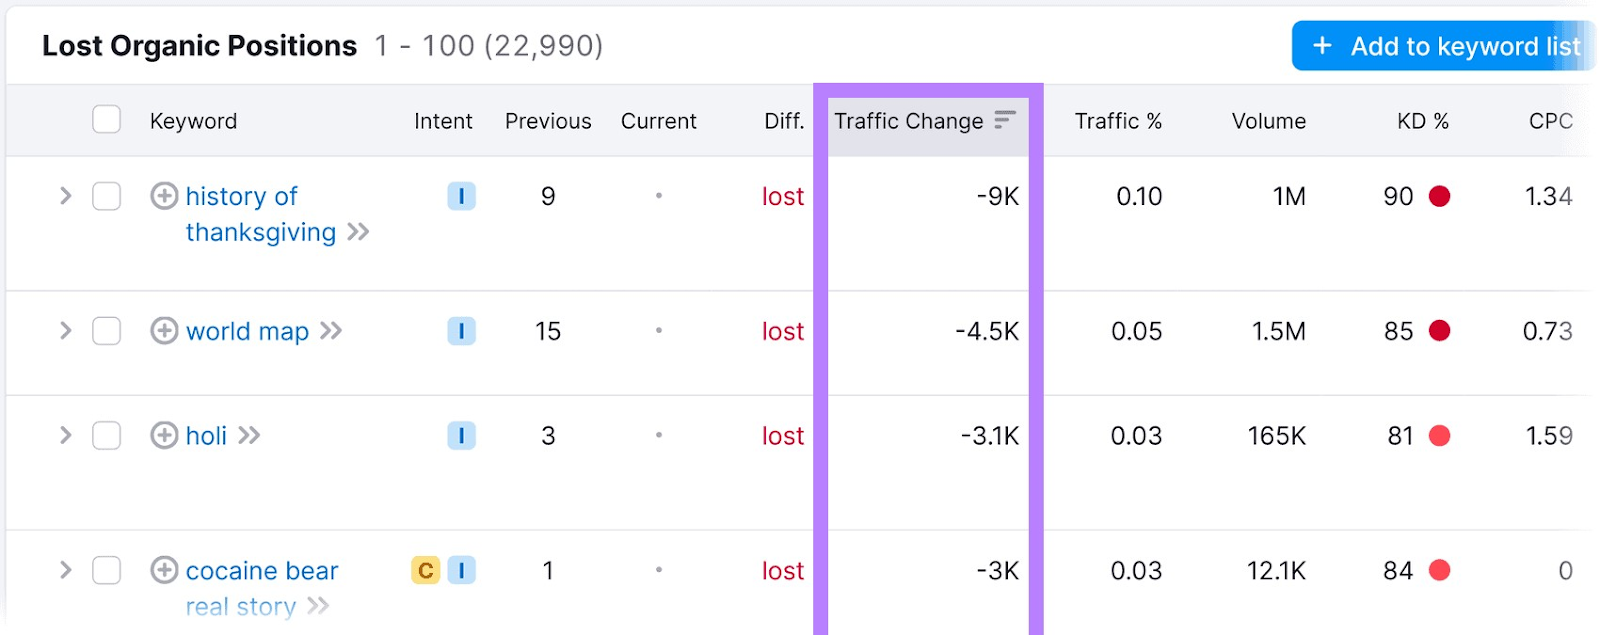 "Lost Organic Positions" table in Organic Research with "Traffic Change" column highlighted